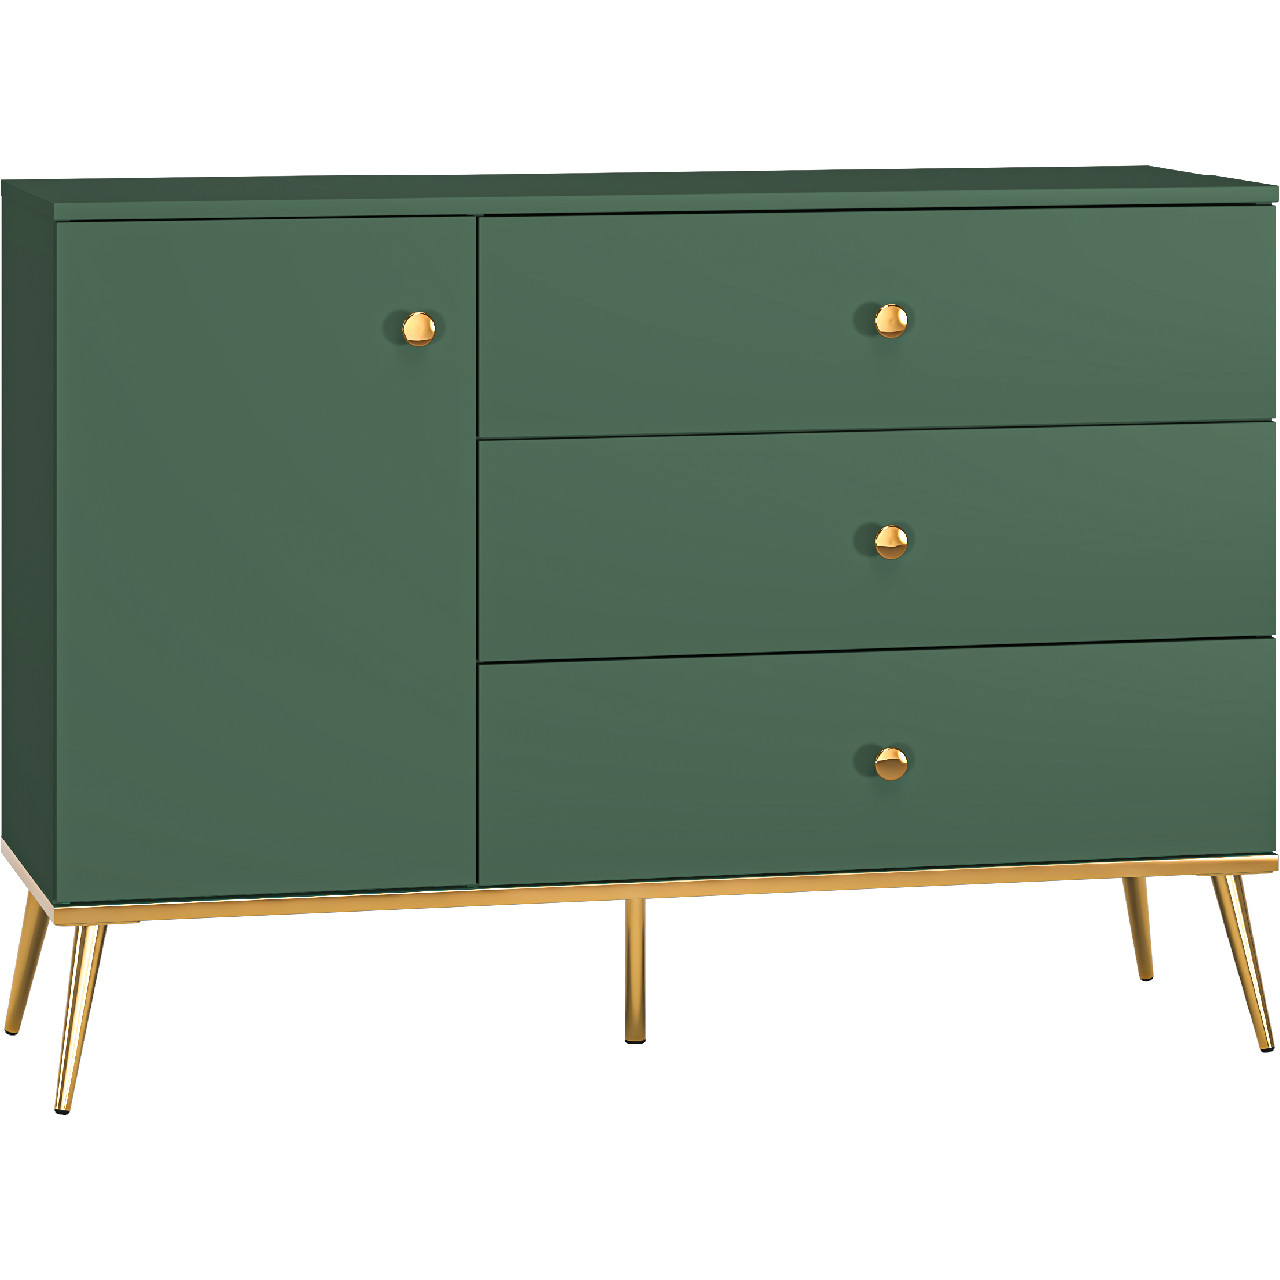 Chest of Drawers SOLER 04 green